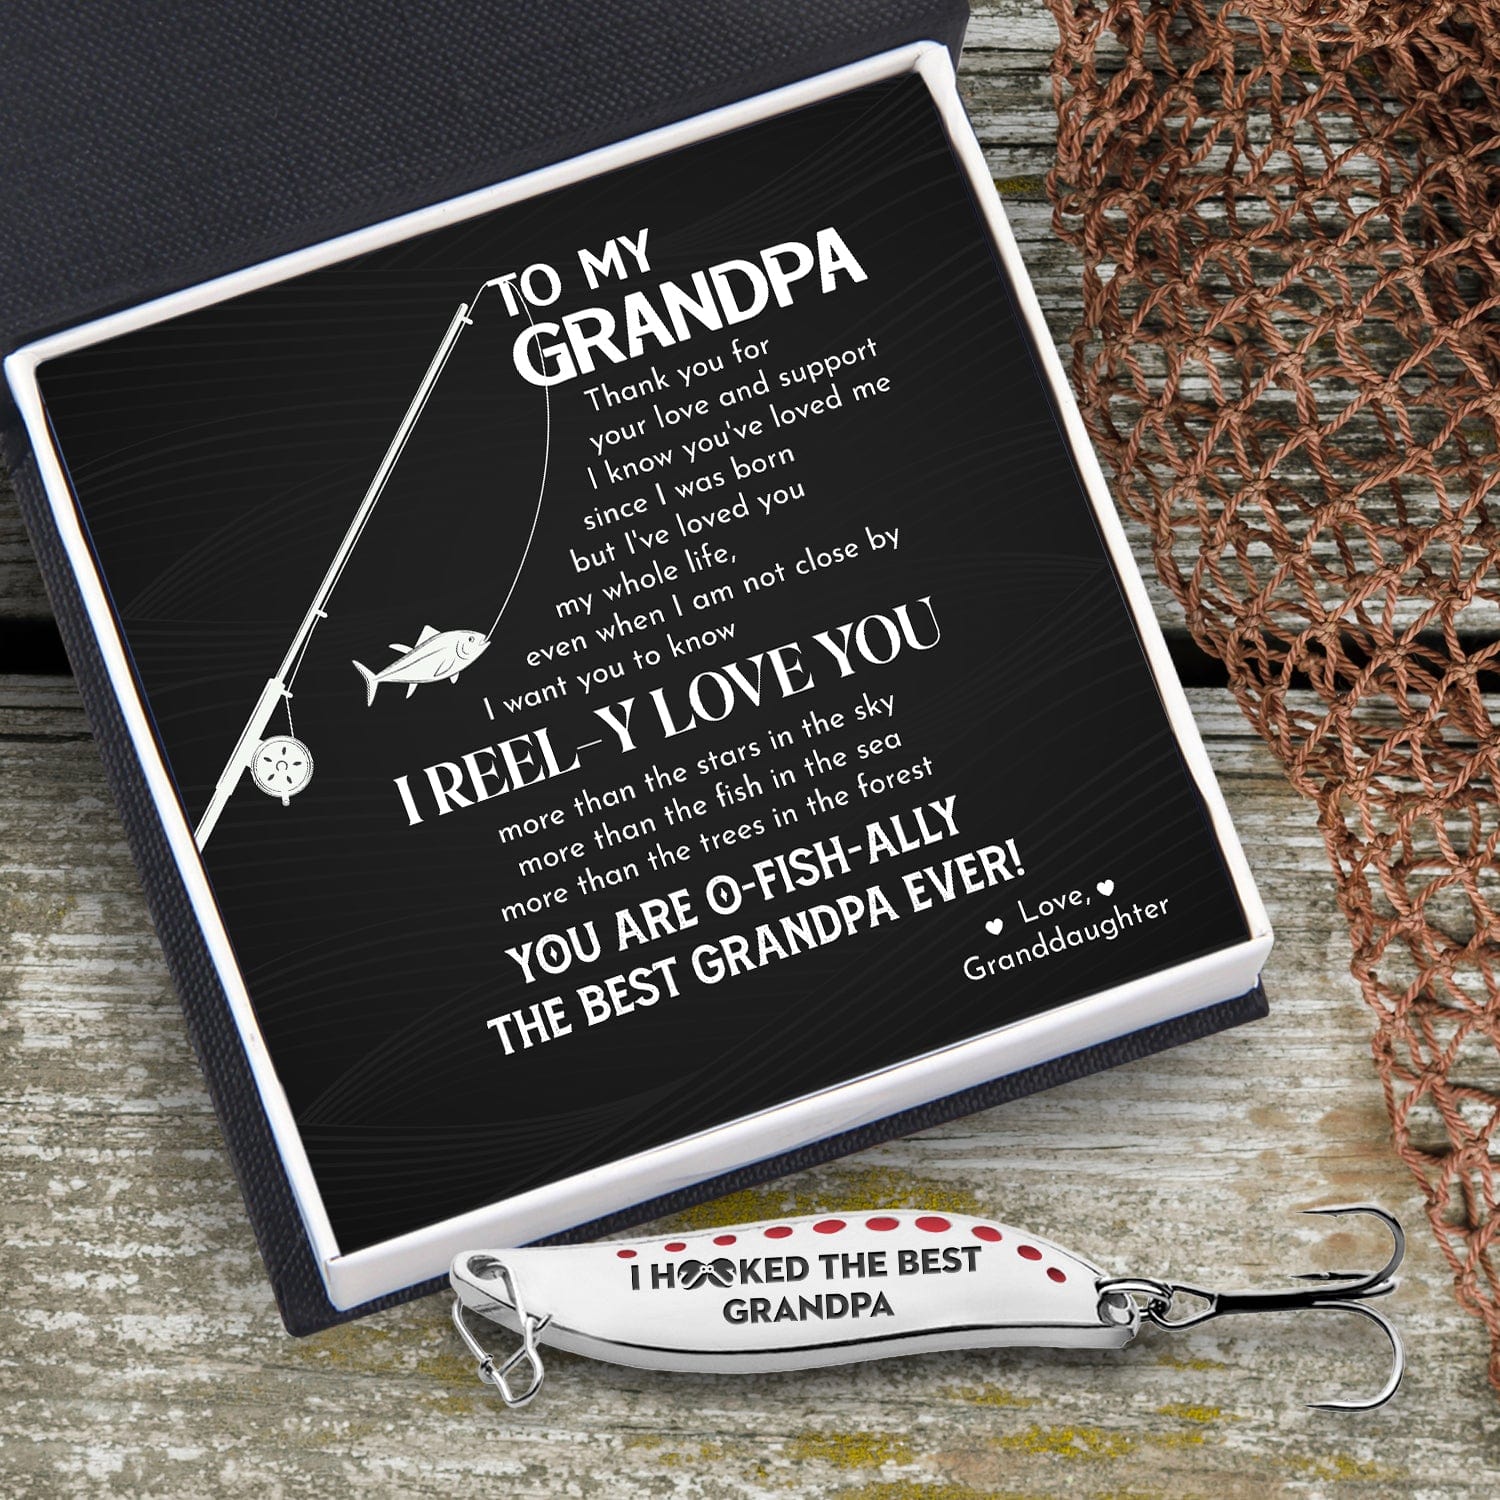 Fishing Lures - Fishing - To My Grandpa - From Granddaughter - I Reel-y  Love You - Gfaa20001